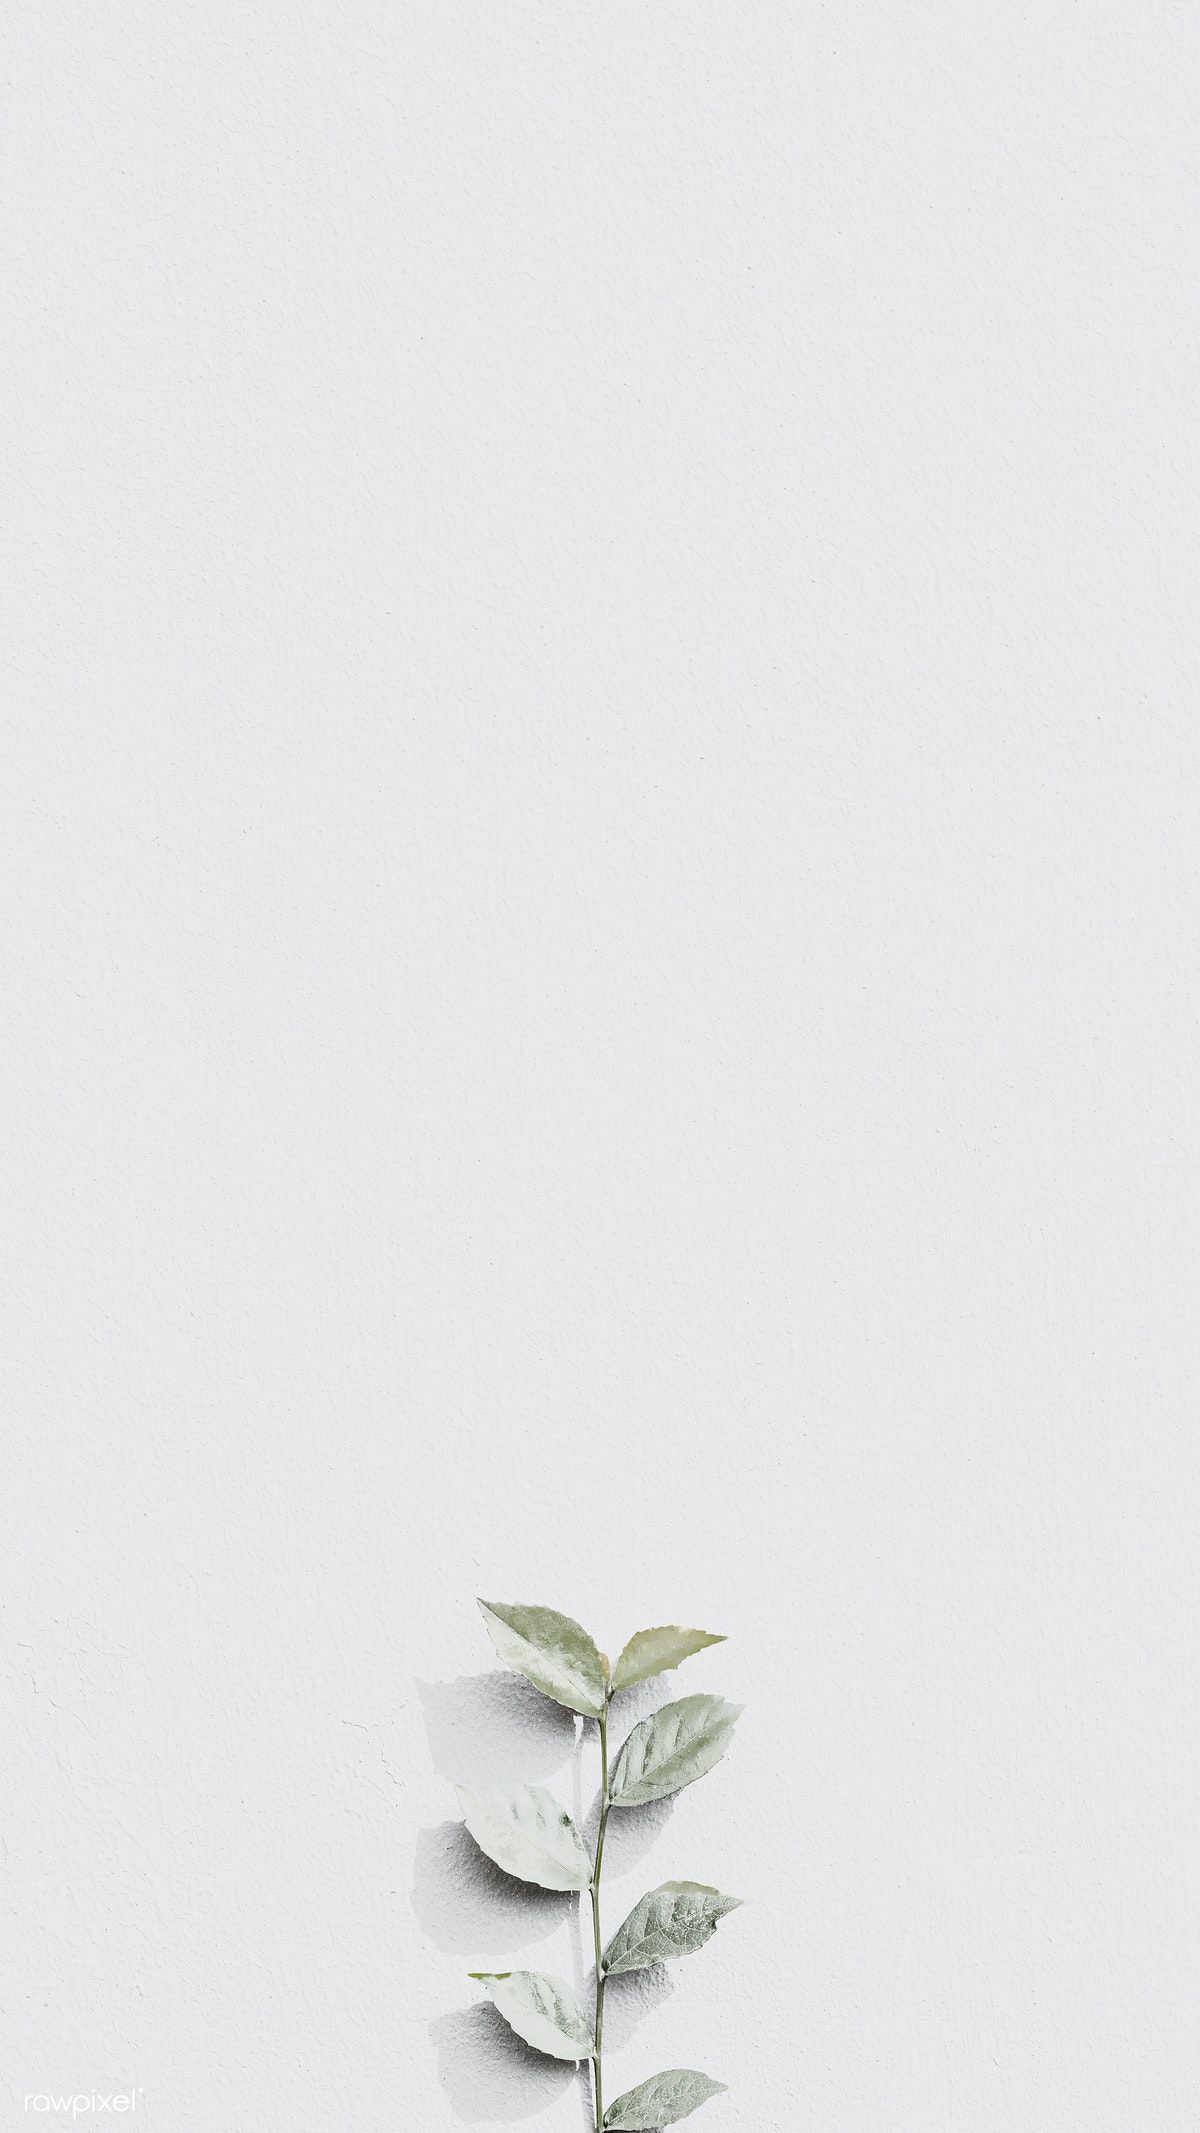 White plant branch on a gray brick wall in natural light background mobile wallpaper. free image. Grey wallpaper iphone, White background wallpaper, White plants